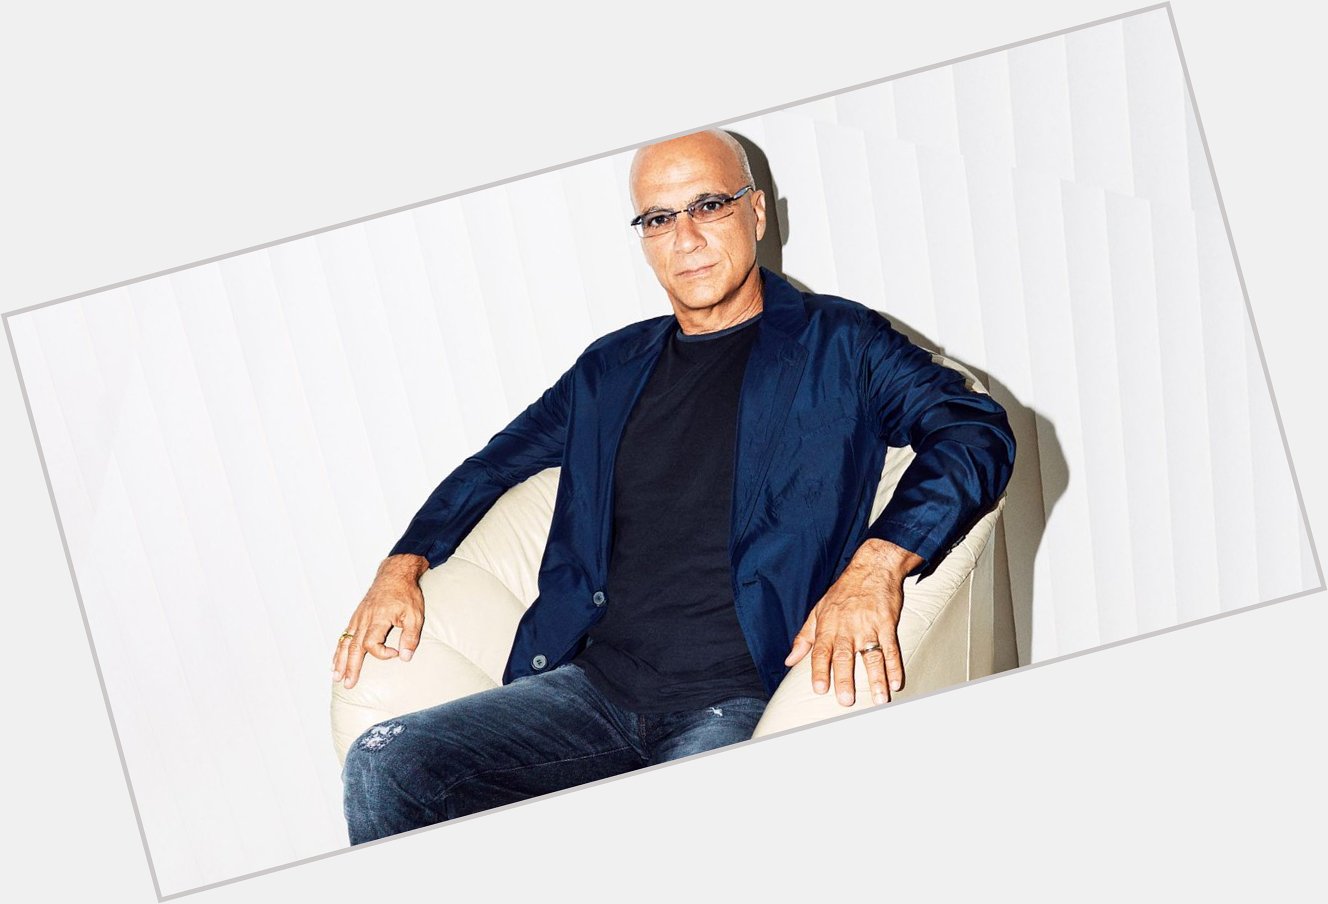 Happy Birthday to legendary record executive/producer and co-founder of Interscope Records Jimmy Iovine. 